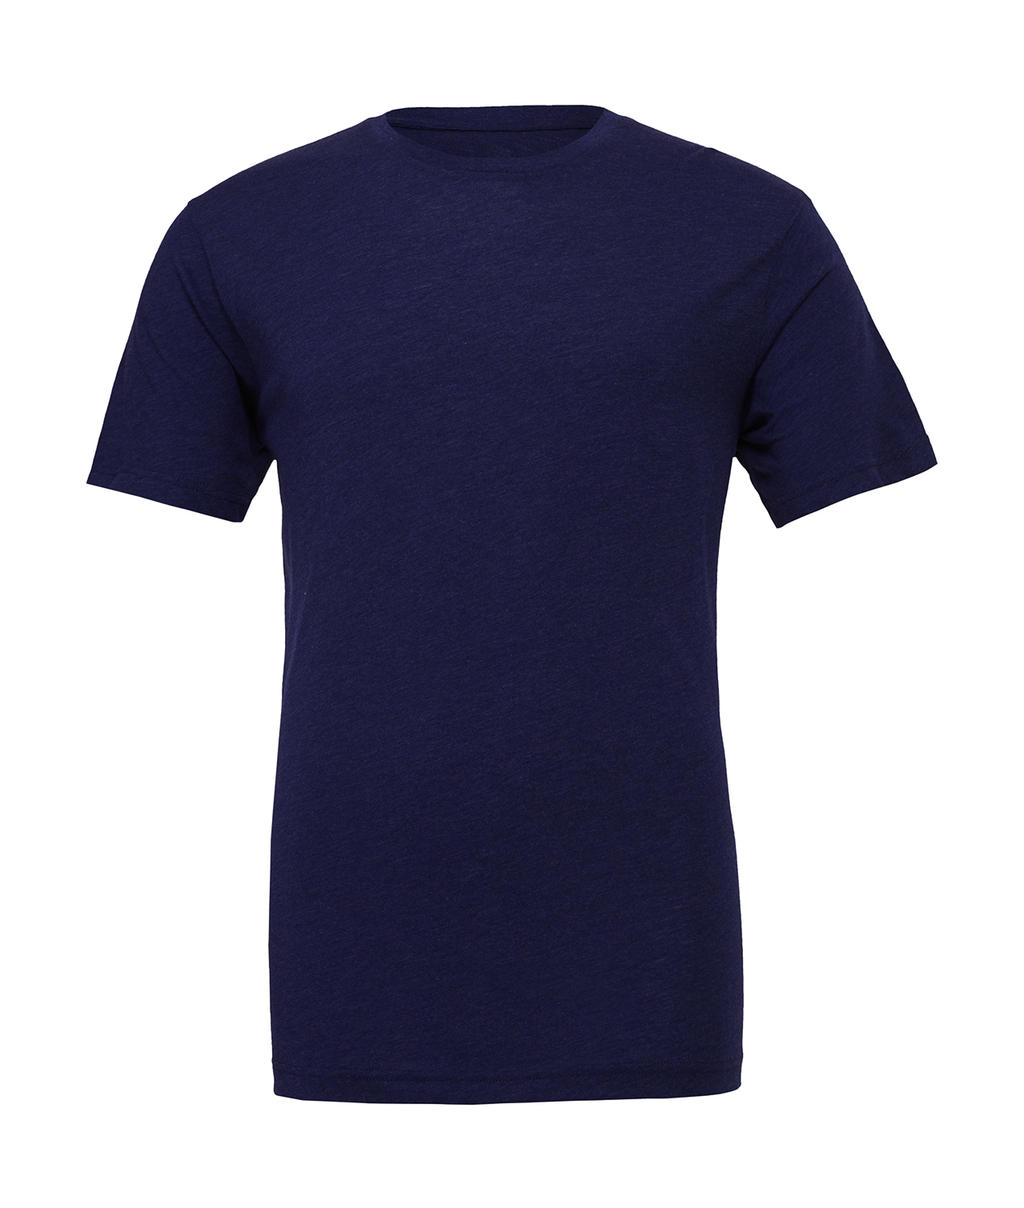  Unisex Triblend Short Sleeve Tee in Farbe Navy Triblend